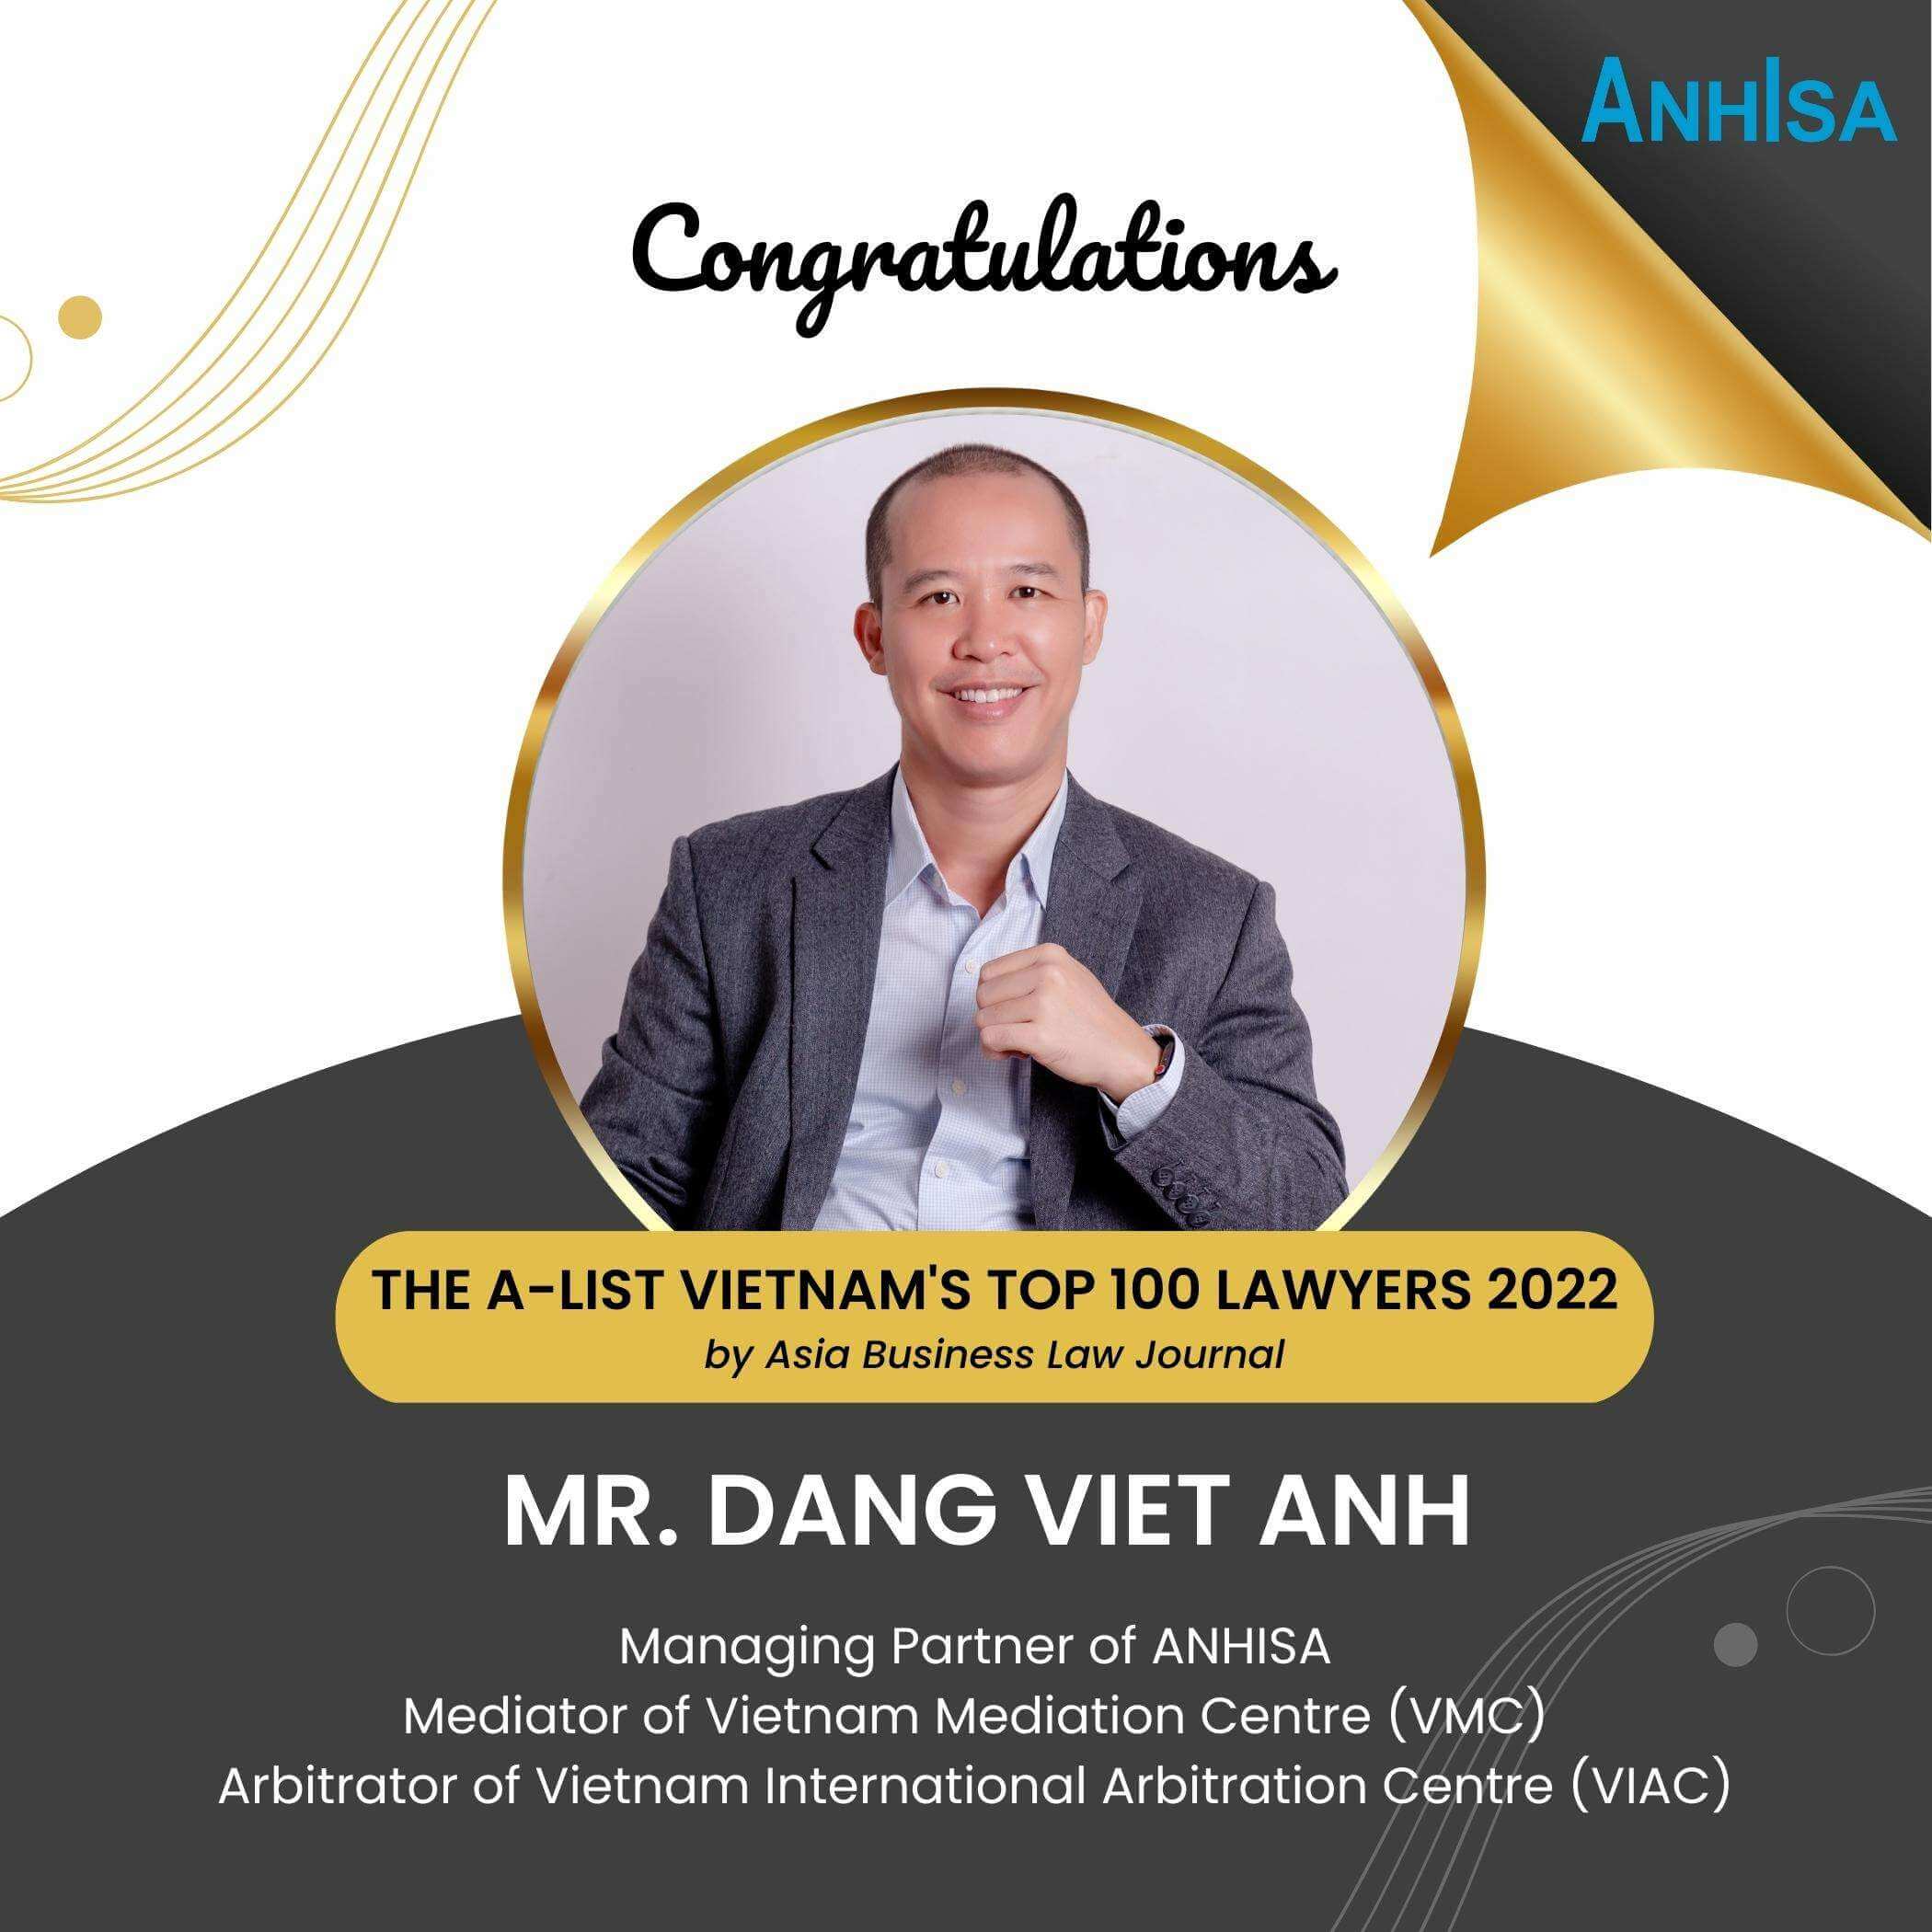 mr. dang viet anh – managing partner of anhisa, is named in the a-list vietnam’s top 100 lawyers 2022 by asia business law journal